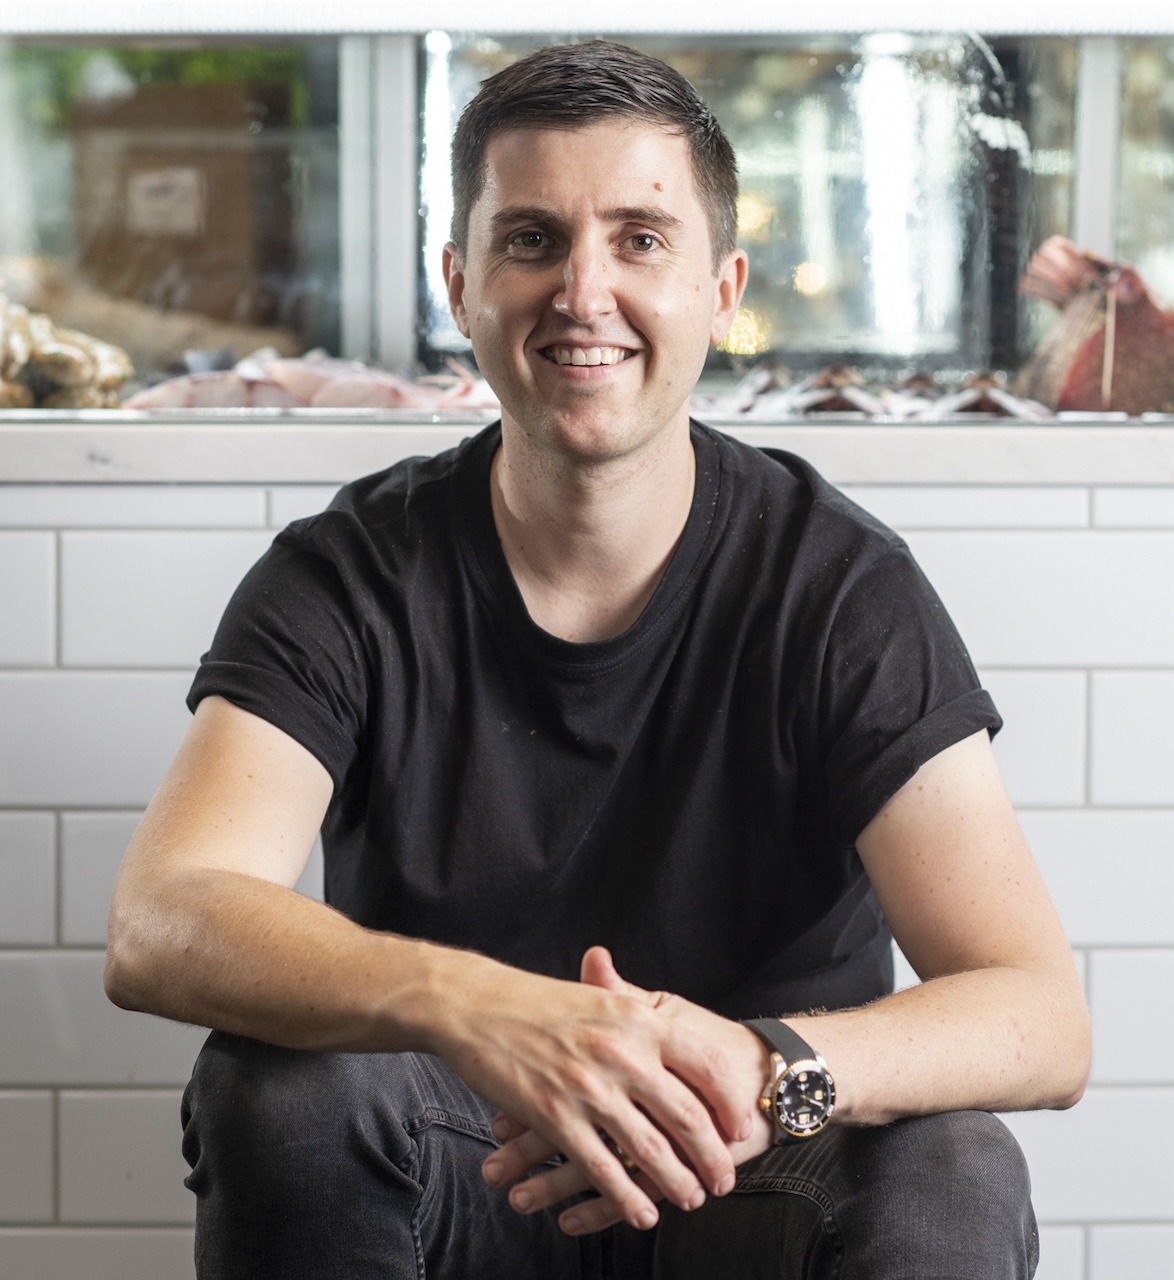 With five outlets in Sydney including flagship restaurant Saint Peter, chef Josh Niland has opened his first restaurant outside of Australia with the arrival of FYSH at the Singapore EDITION.